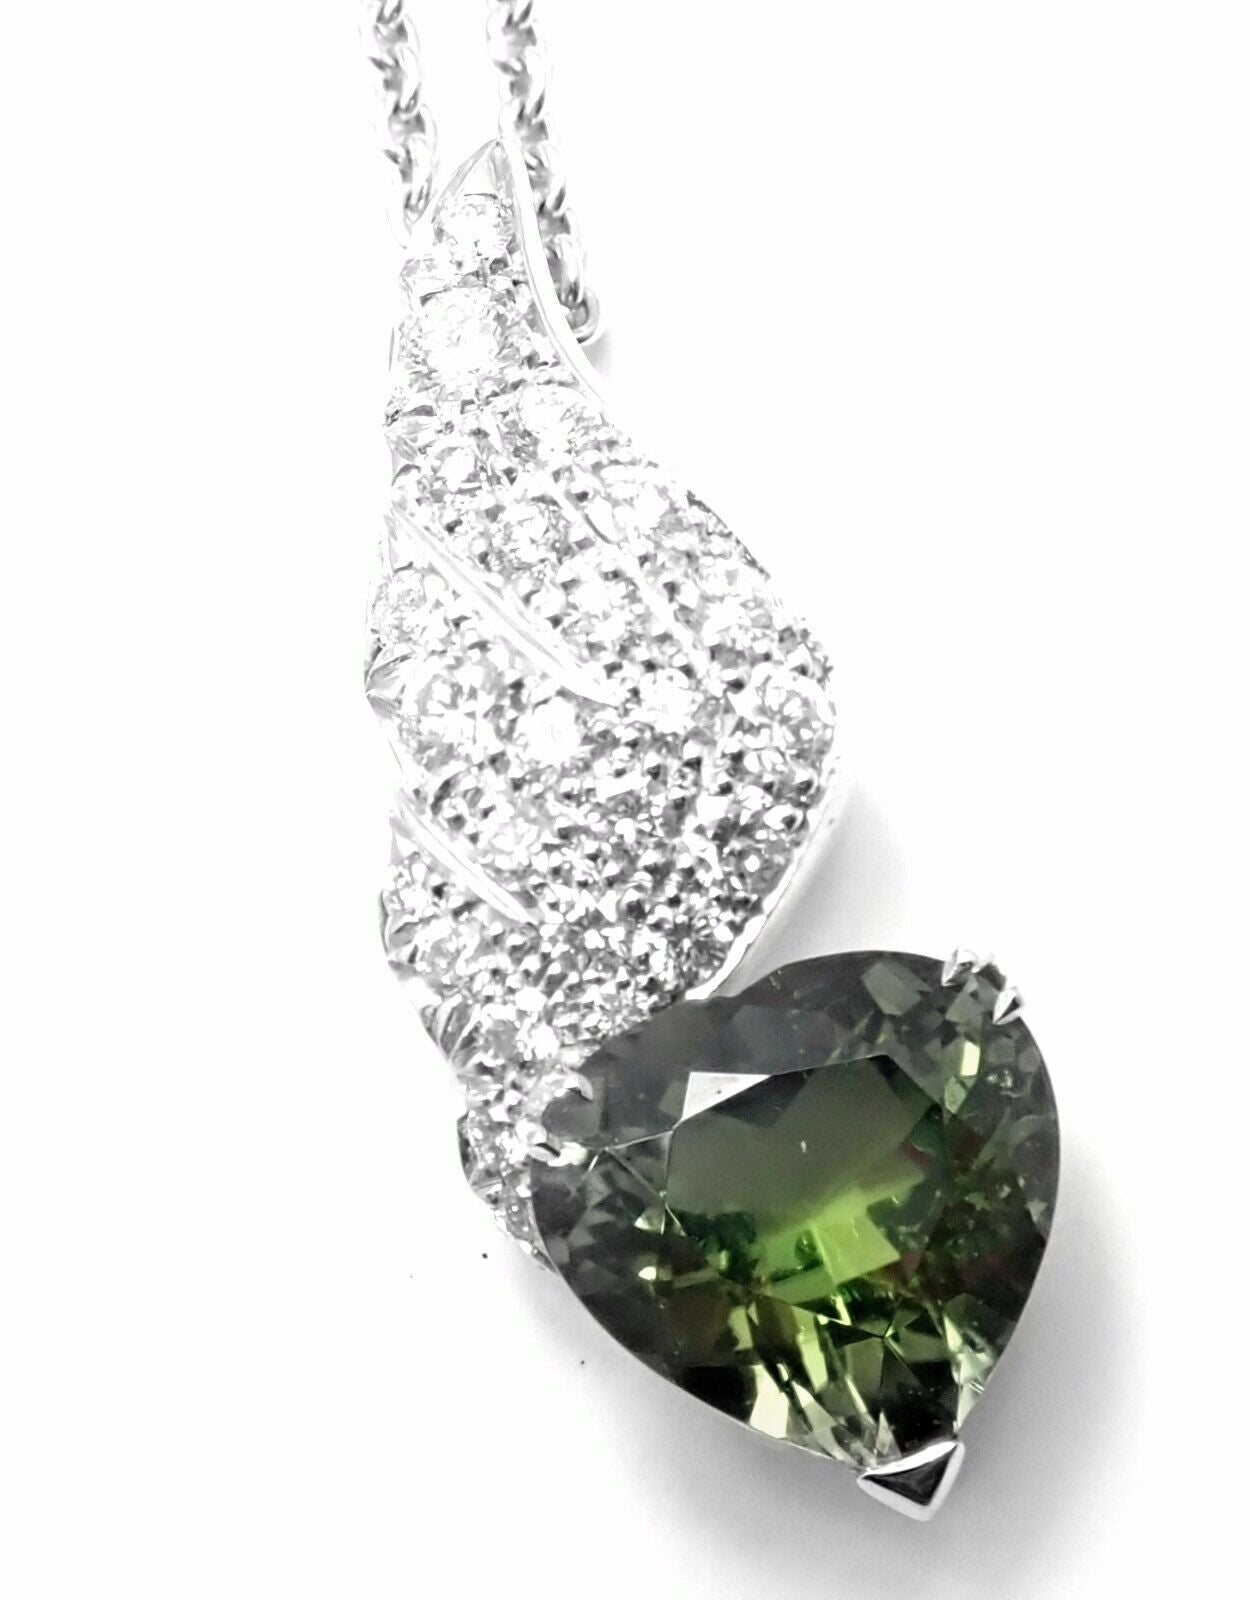 Piaget Jewelry & Watches:Fine Jewelry:Necklaces & Pendants Rare! Authentic Piaget 18k White Gold Diamond Peridot Heart Pendant Necklace